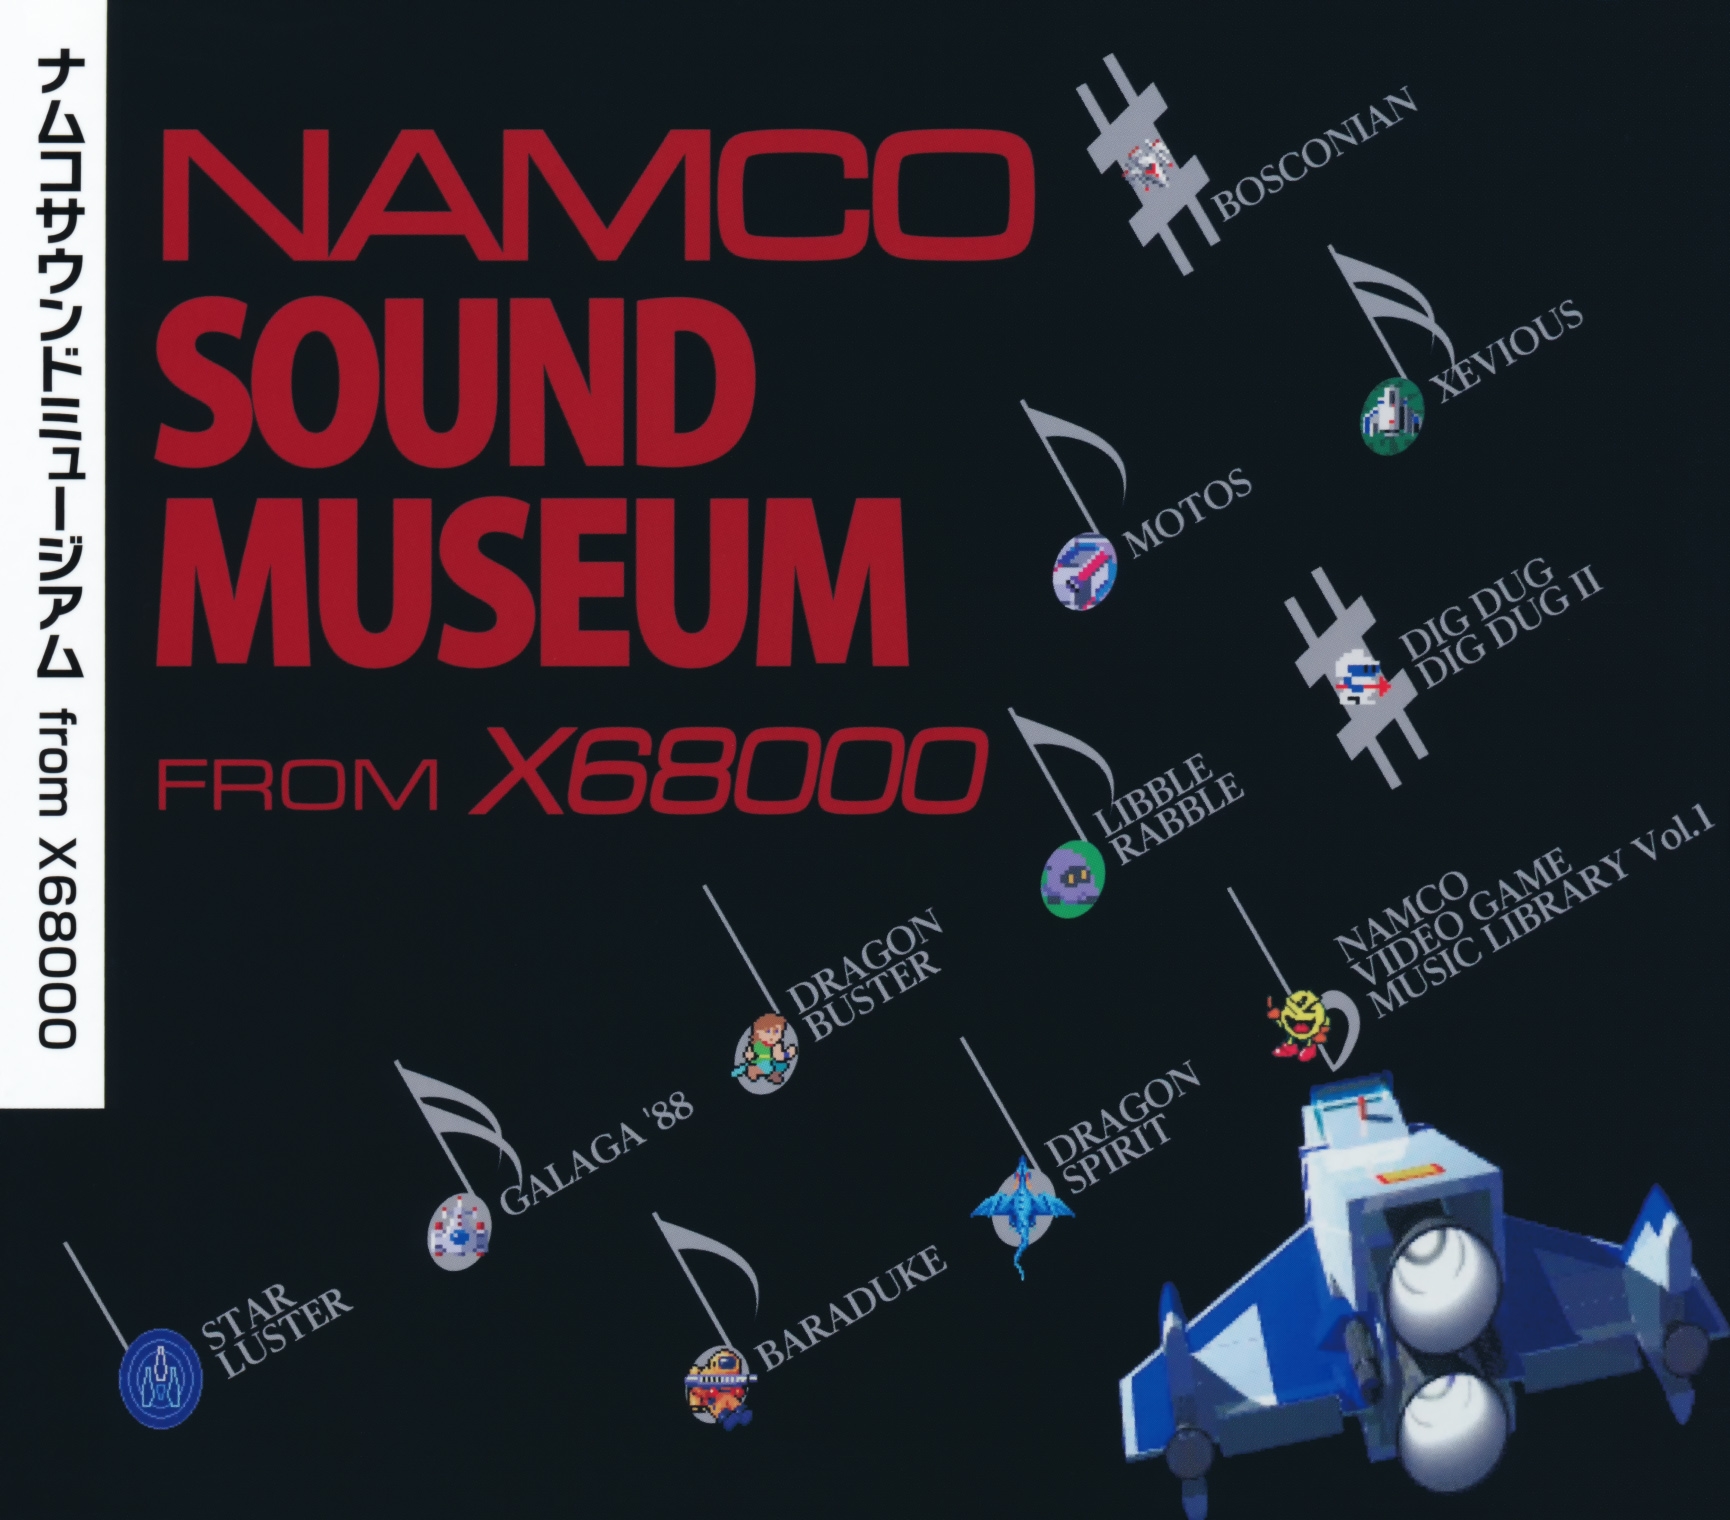 NAMCO SOUND MUSEUM from X68000 (2018) MP3 - Download NAMCO SOUND MUSEUM  from X68000 (2018) Soundtracks for FREE!